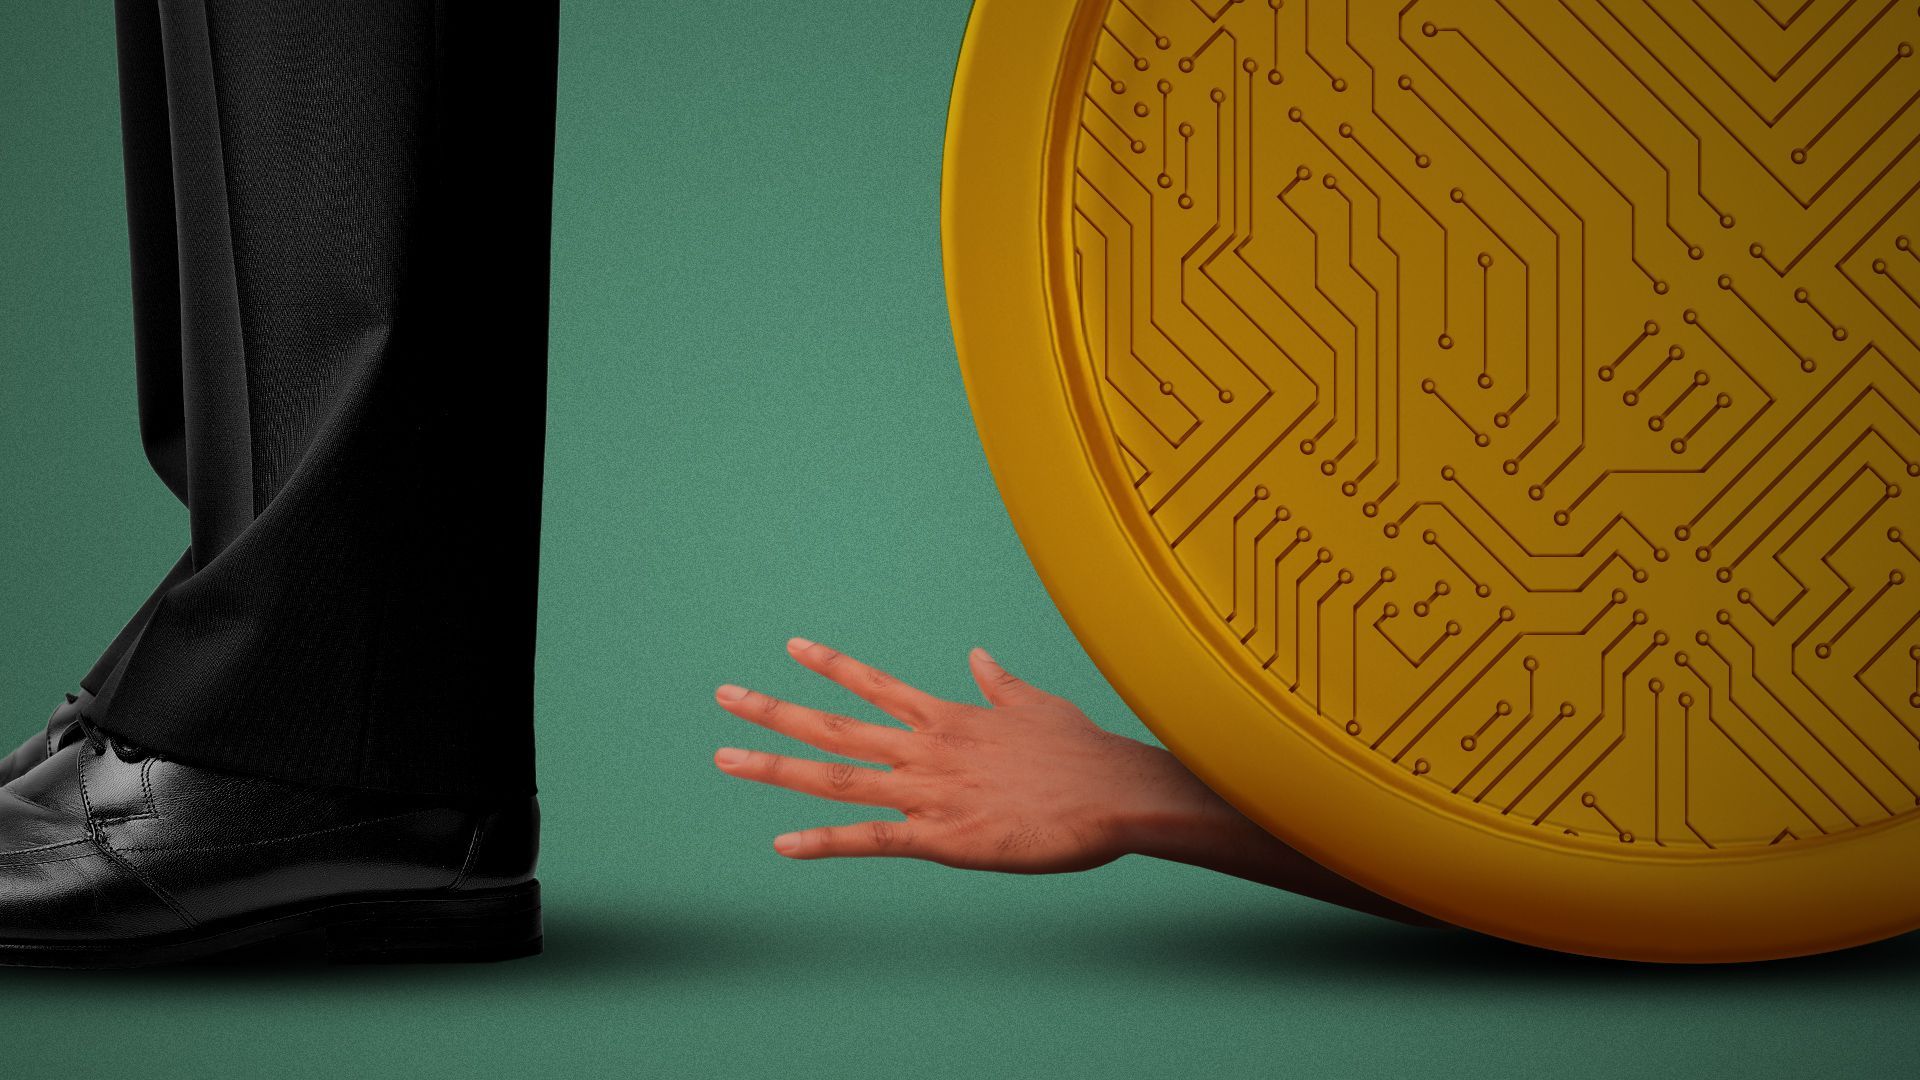 Illustration of a hand being crushed by a crypto coin and reaching out for help, with a pair of legs turned away just out of reach.